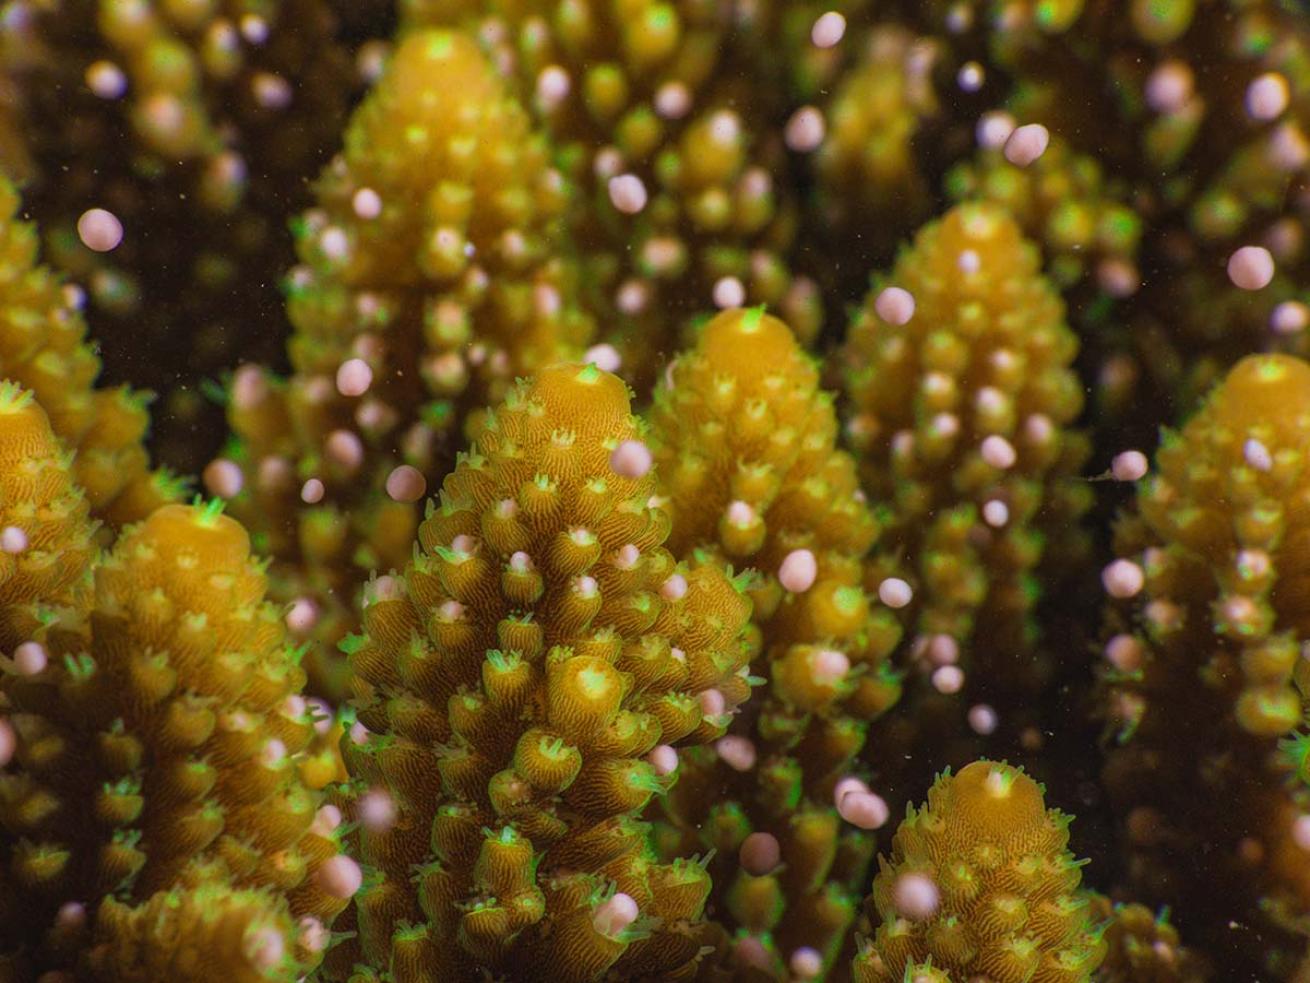 acropora spawning close up sac release